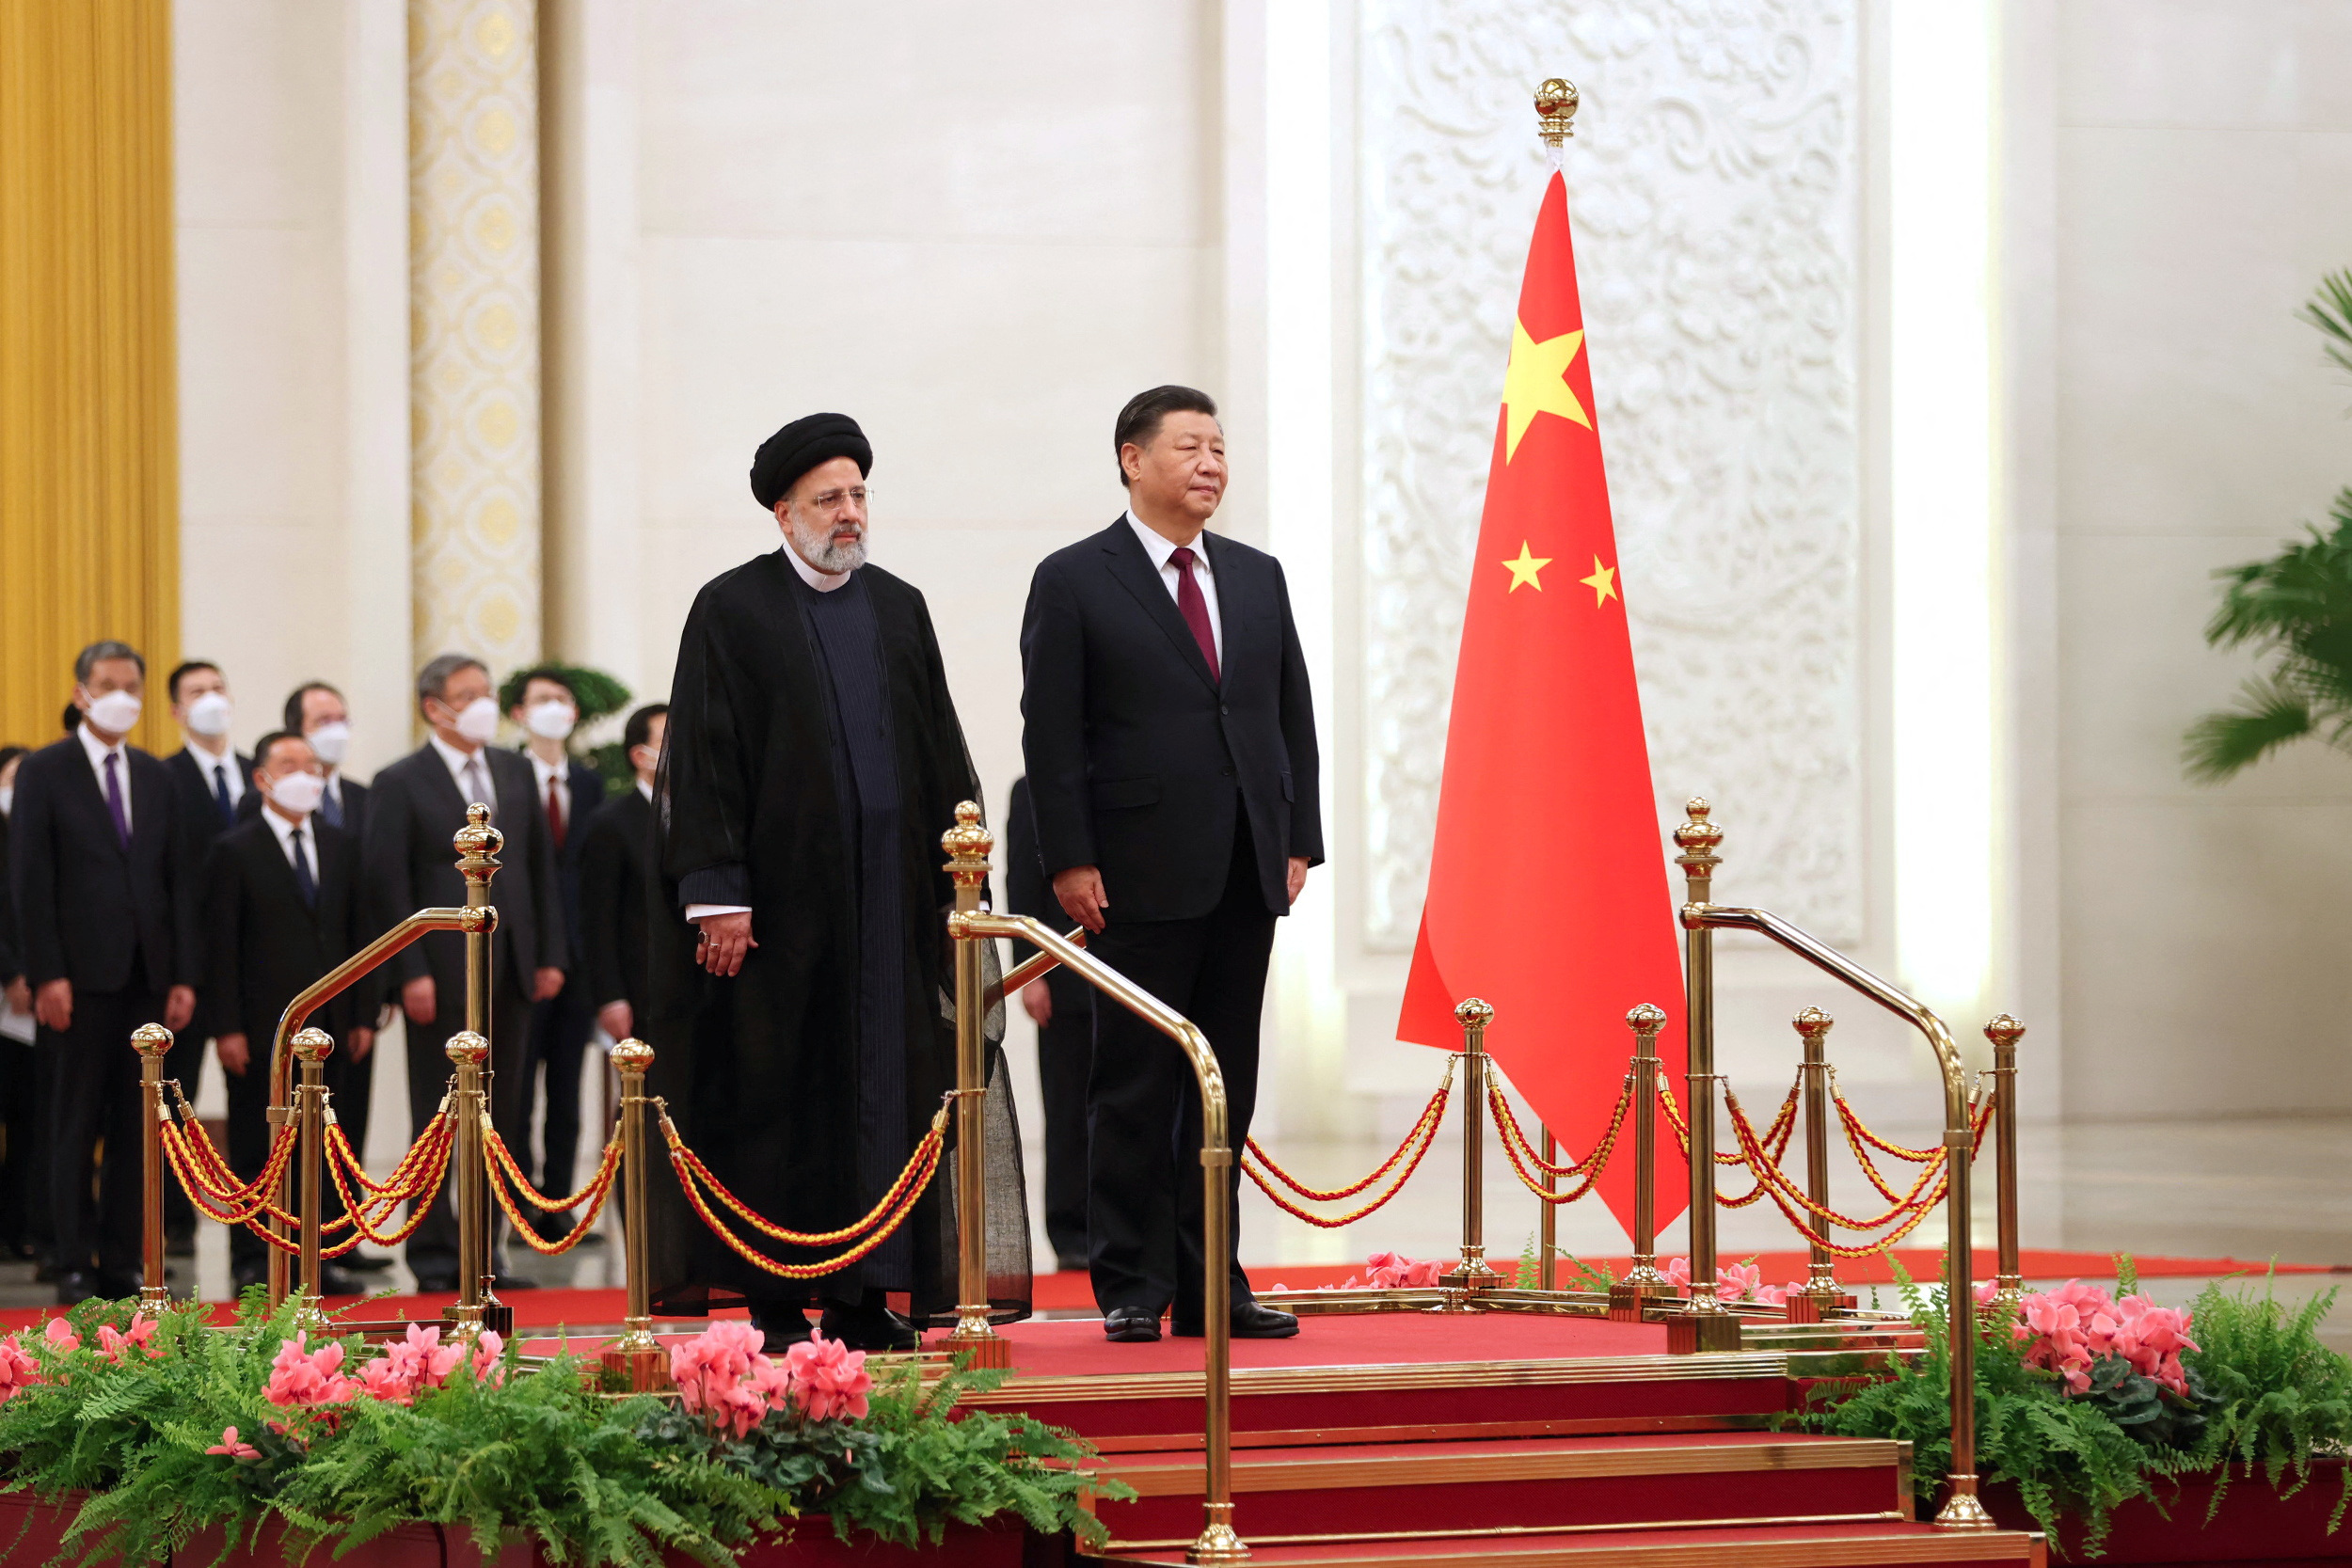 china-iran-relations-are-warming-here-s-what-the-rest-of-the-world